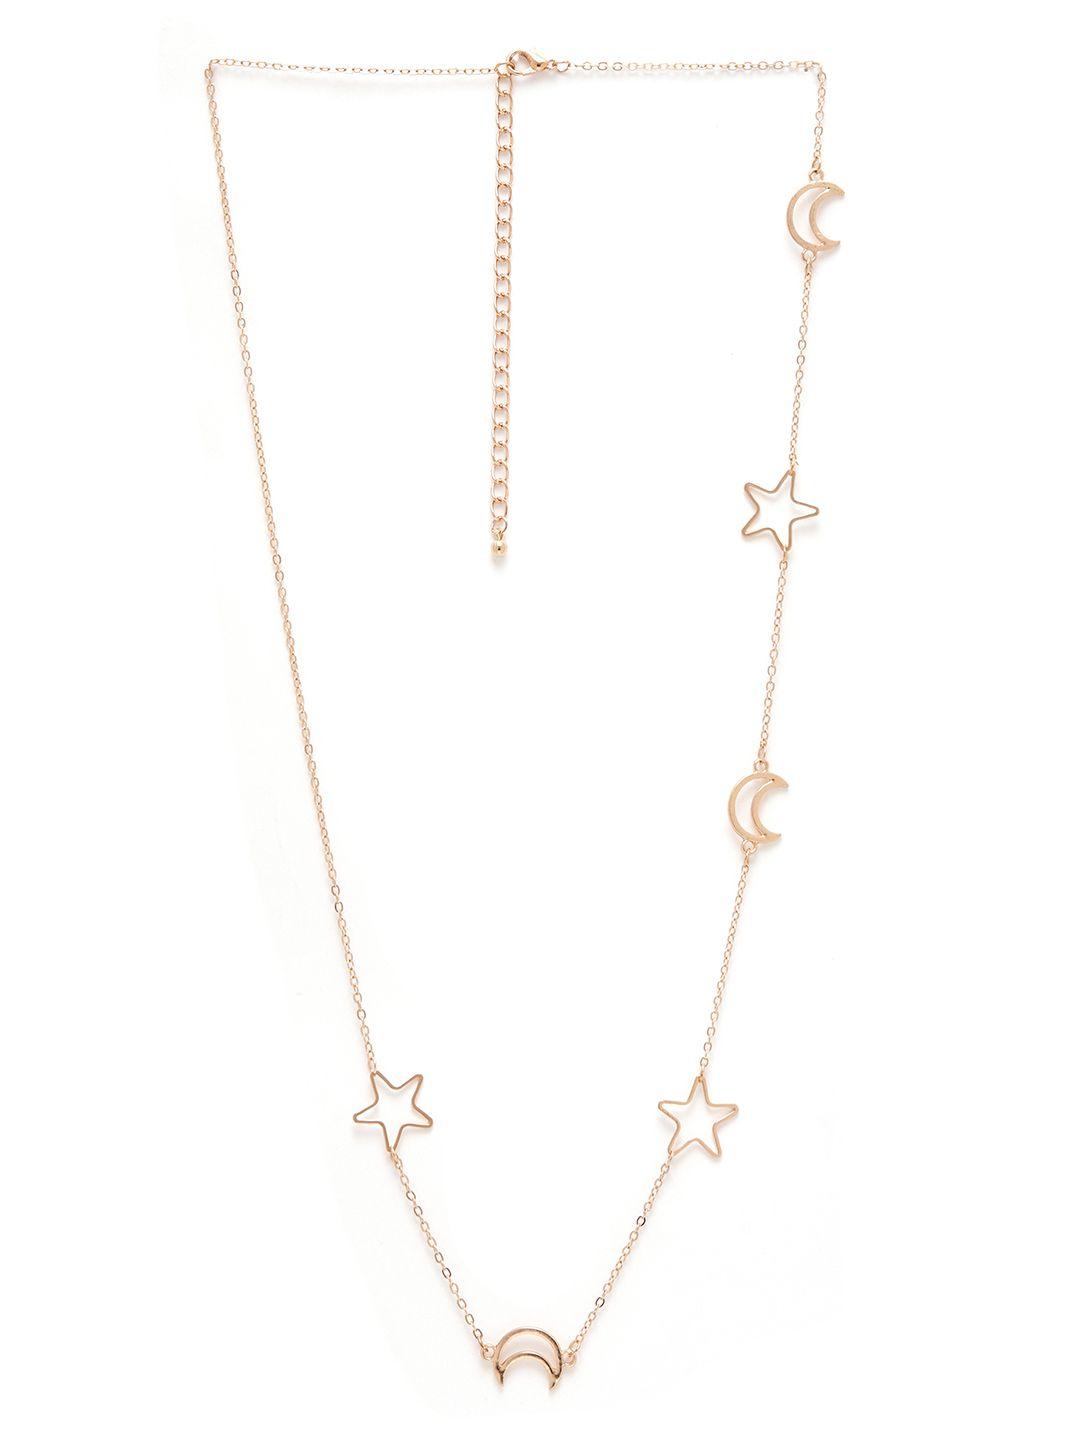 urbanic gold-toned linked chain necklace with multiple charms